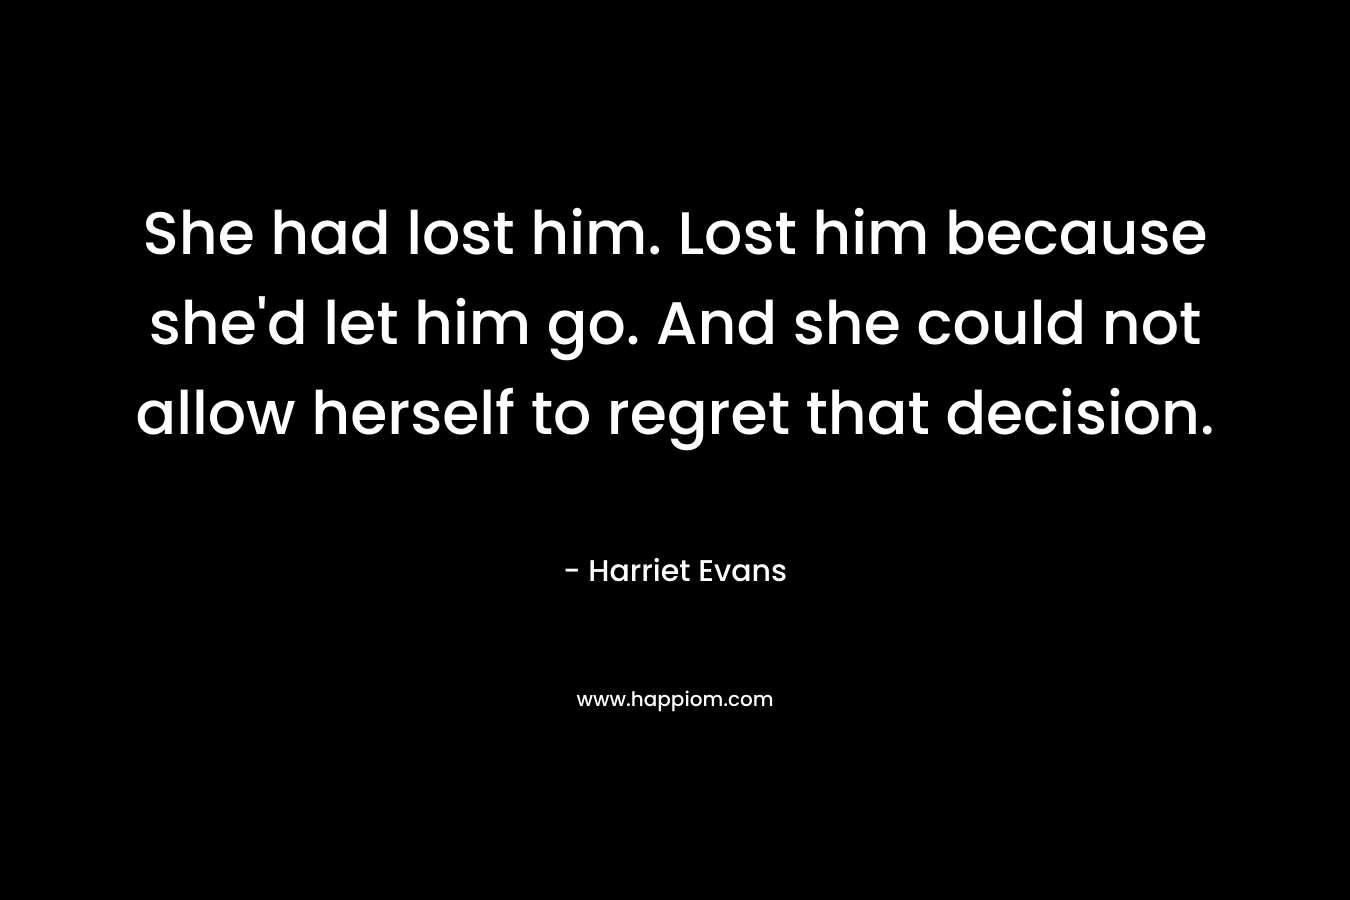 She had lost him. Lost him because she'd let him go. And she could not allow herself to regret that decision.